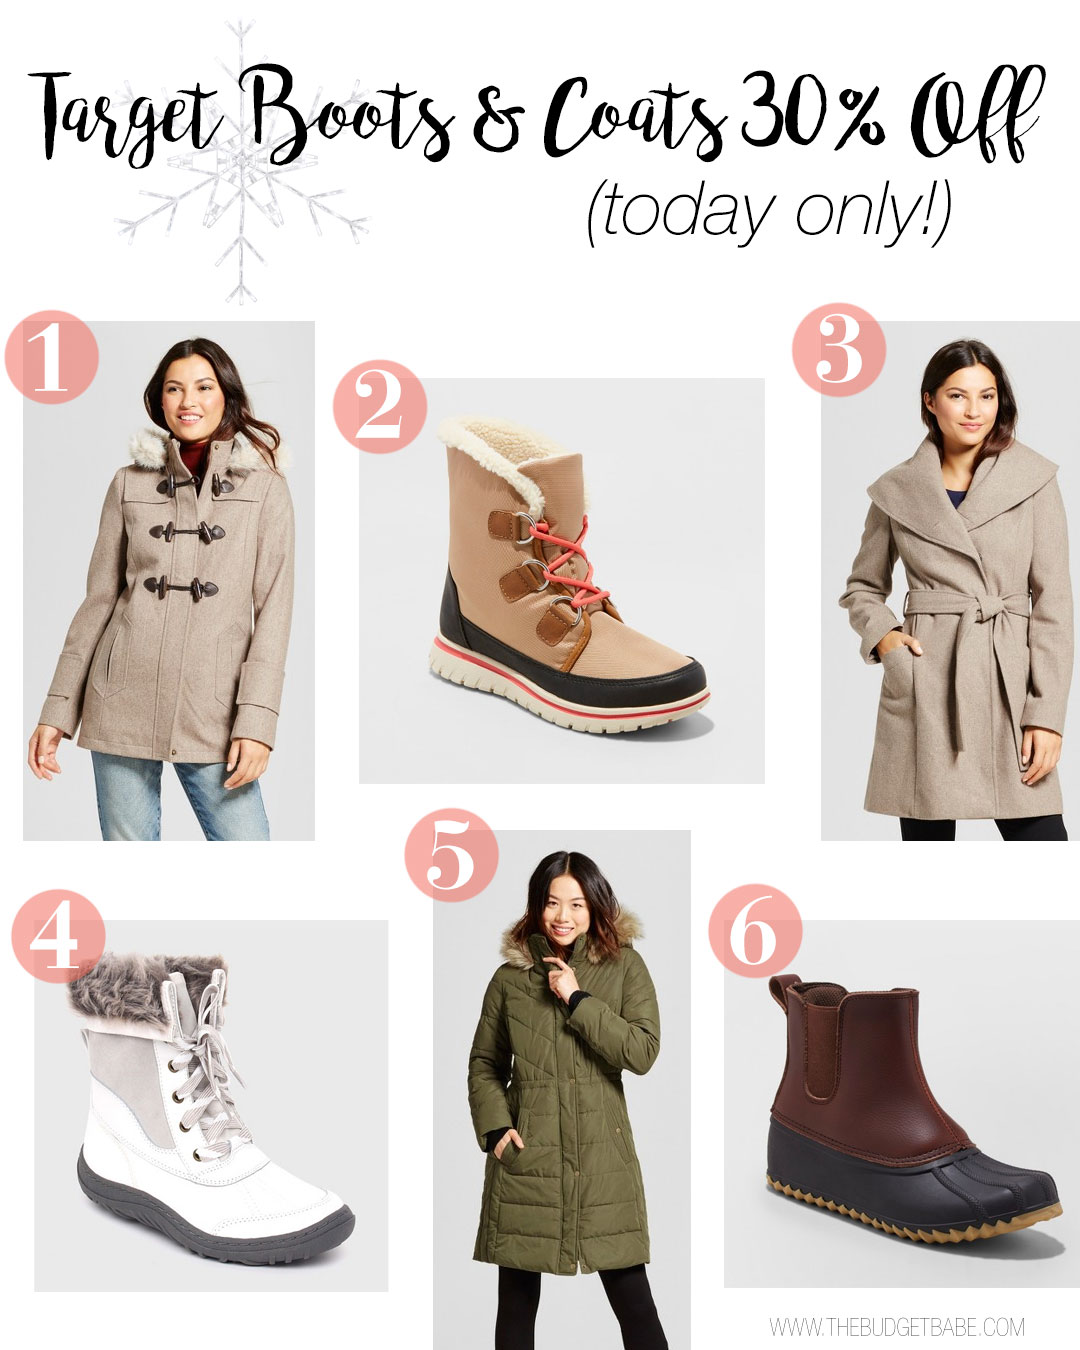 Target Boots and Coats are 30% off today only - for the whole family!